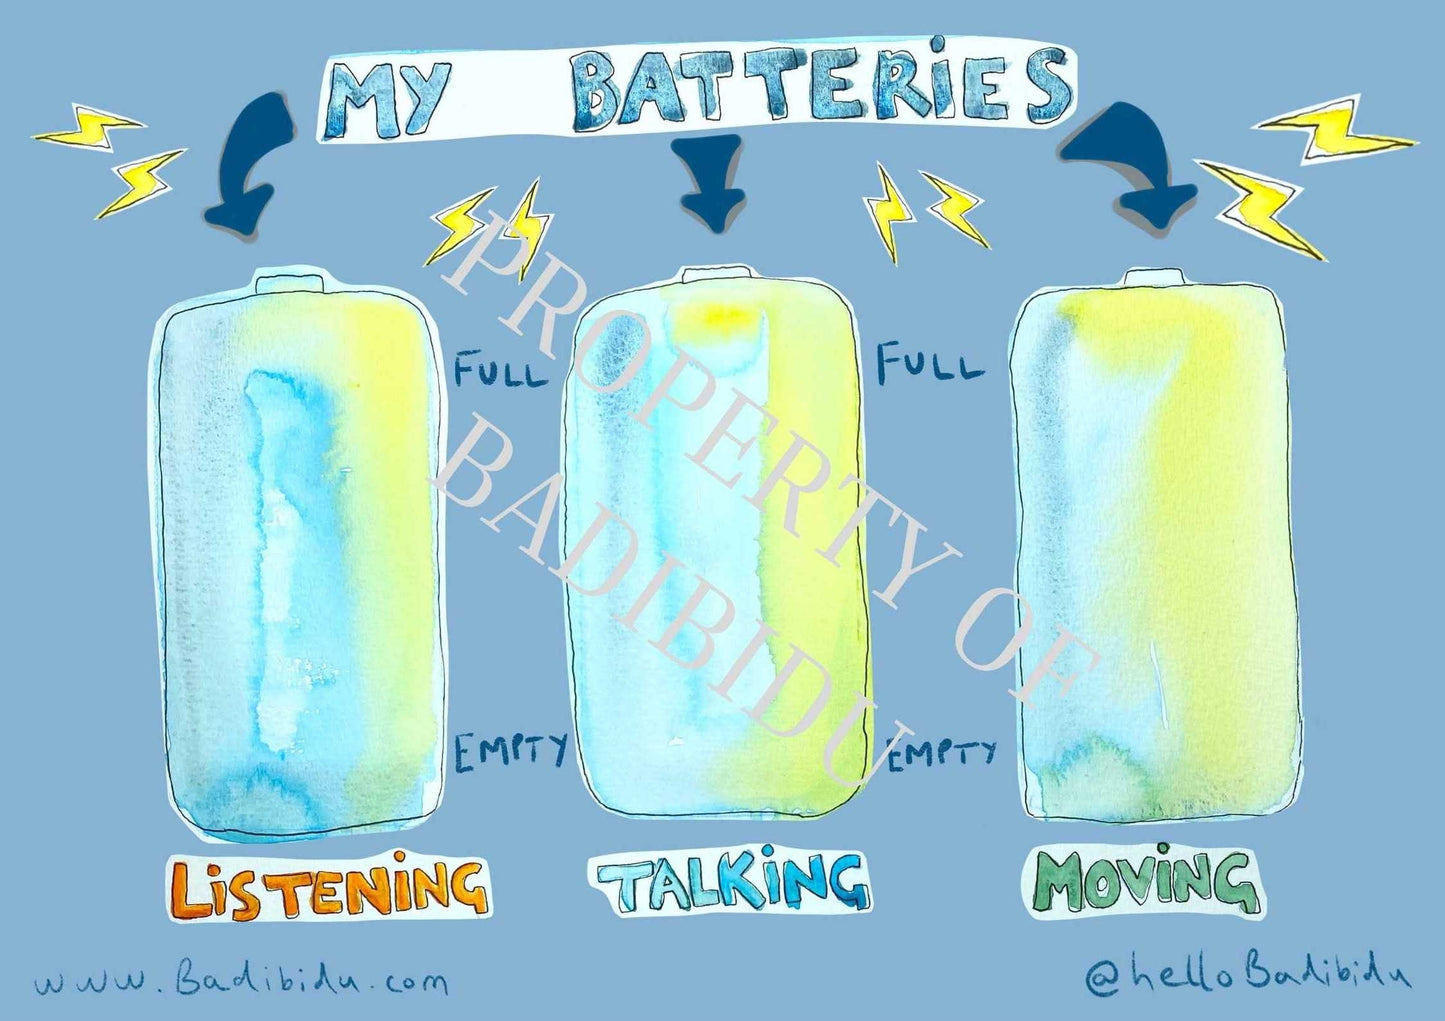 My Batteries - energy management download